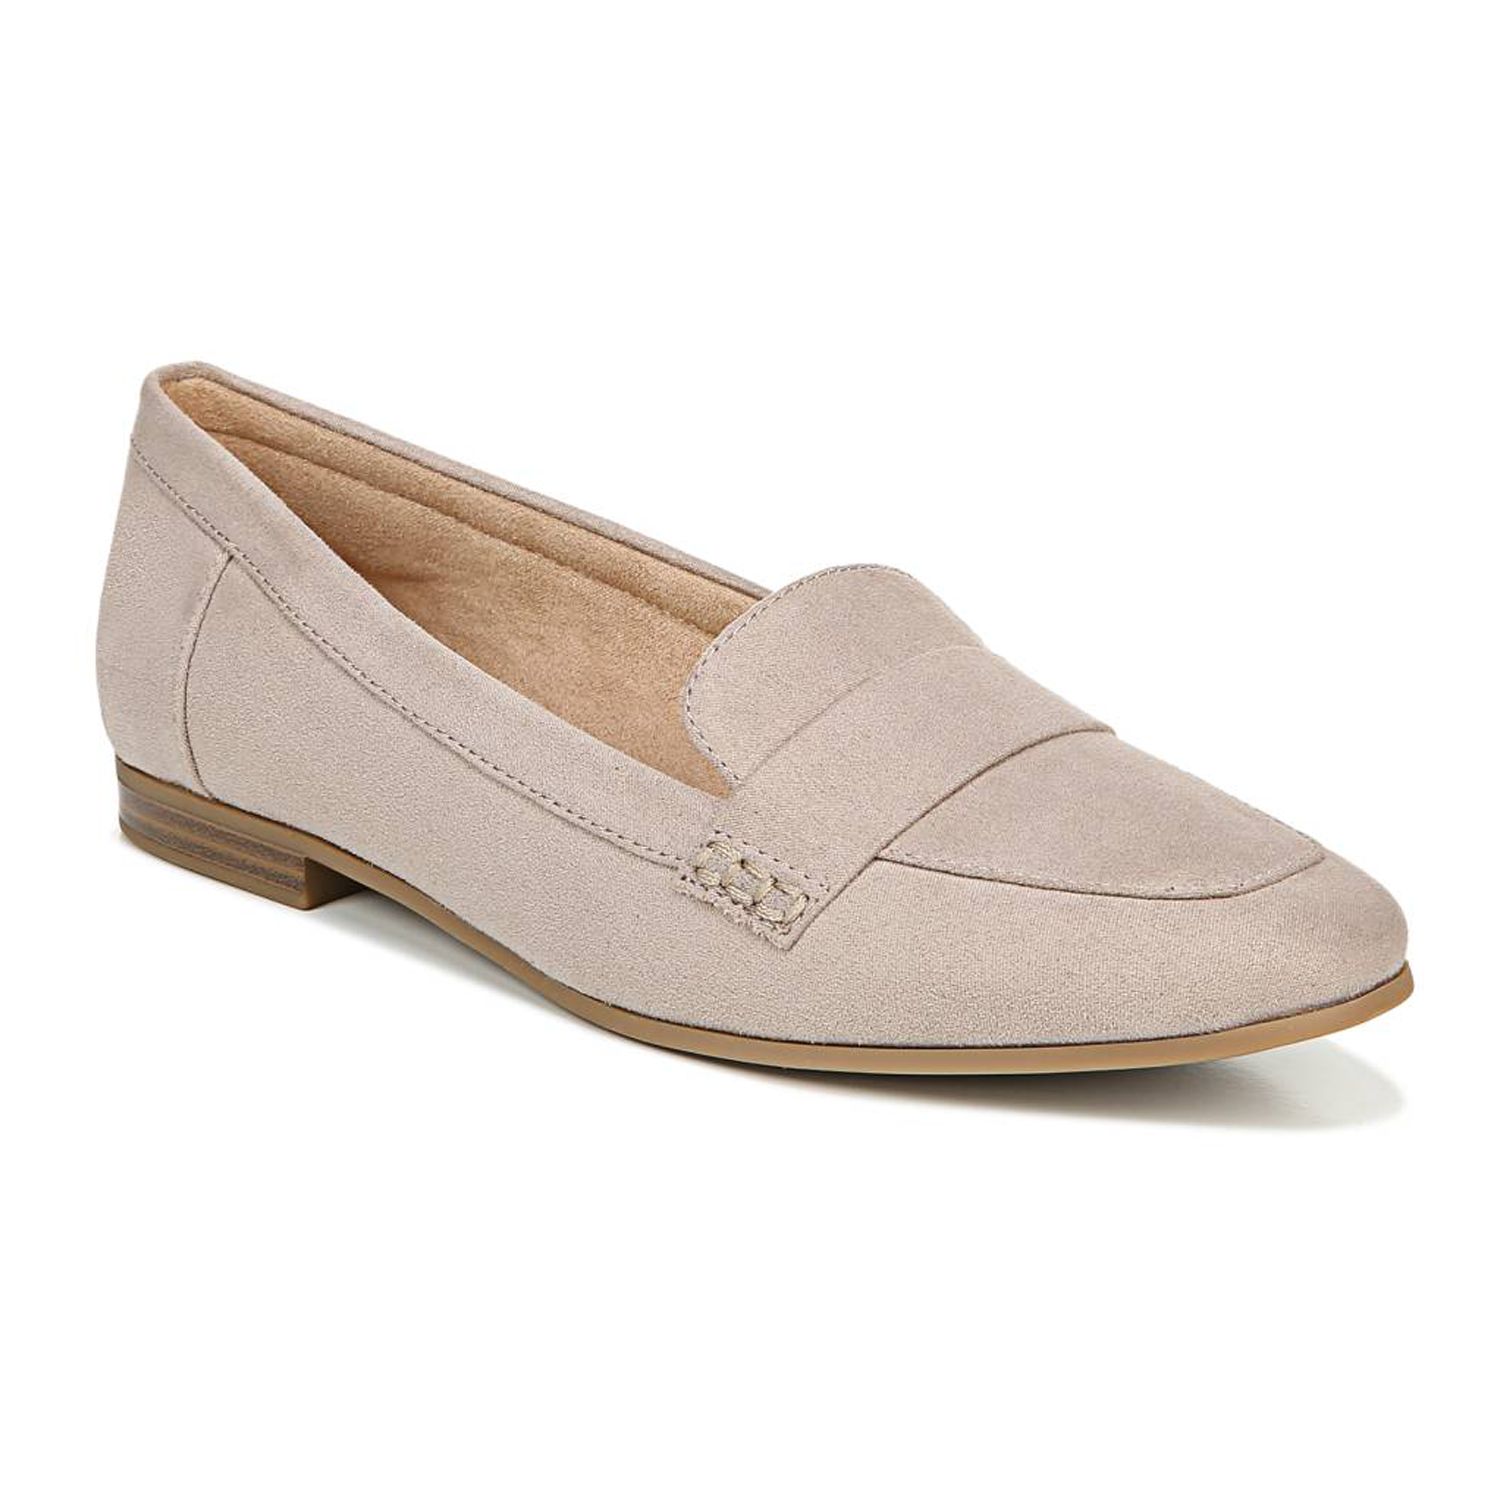 naturalizer slip on loafers